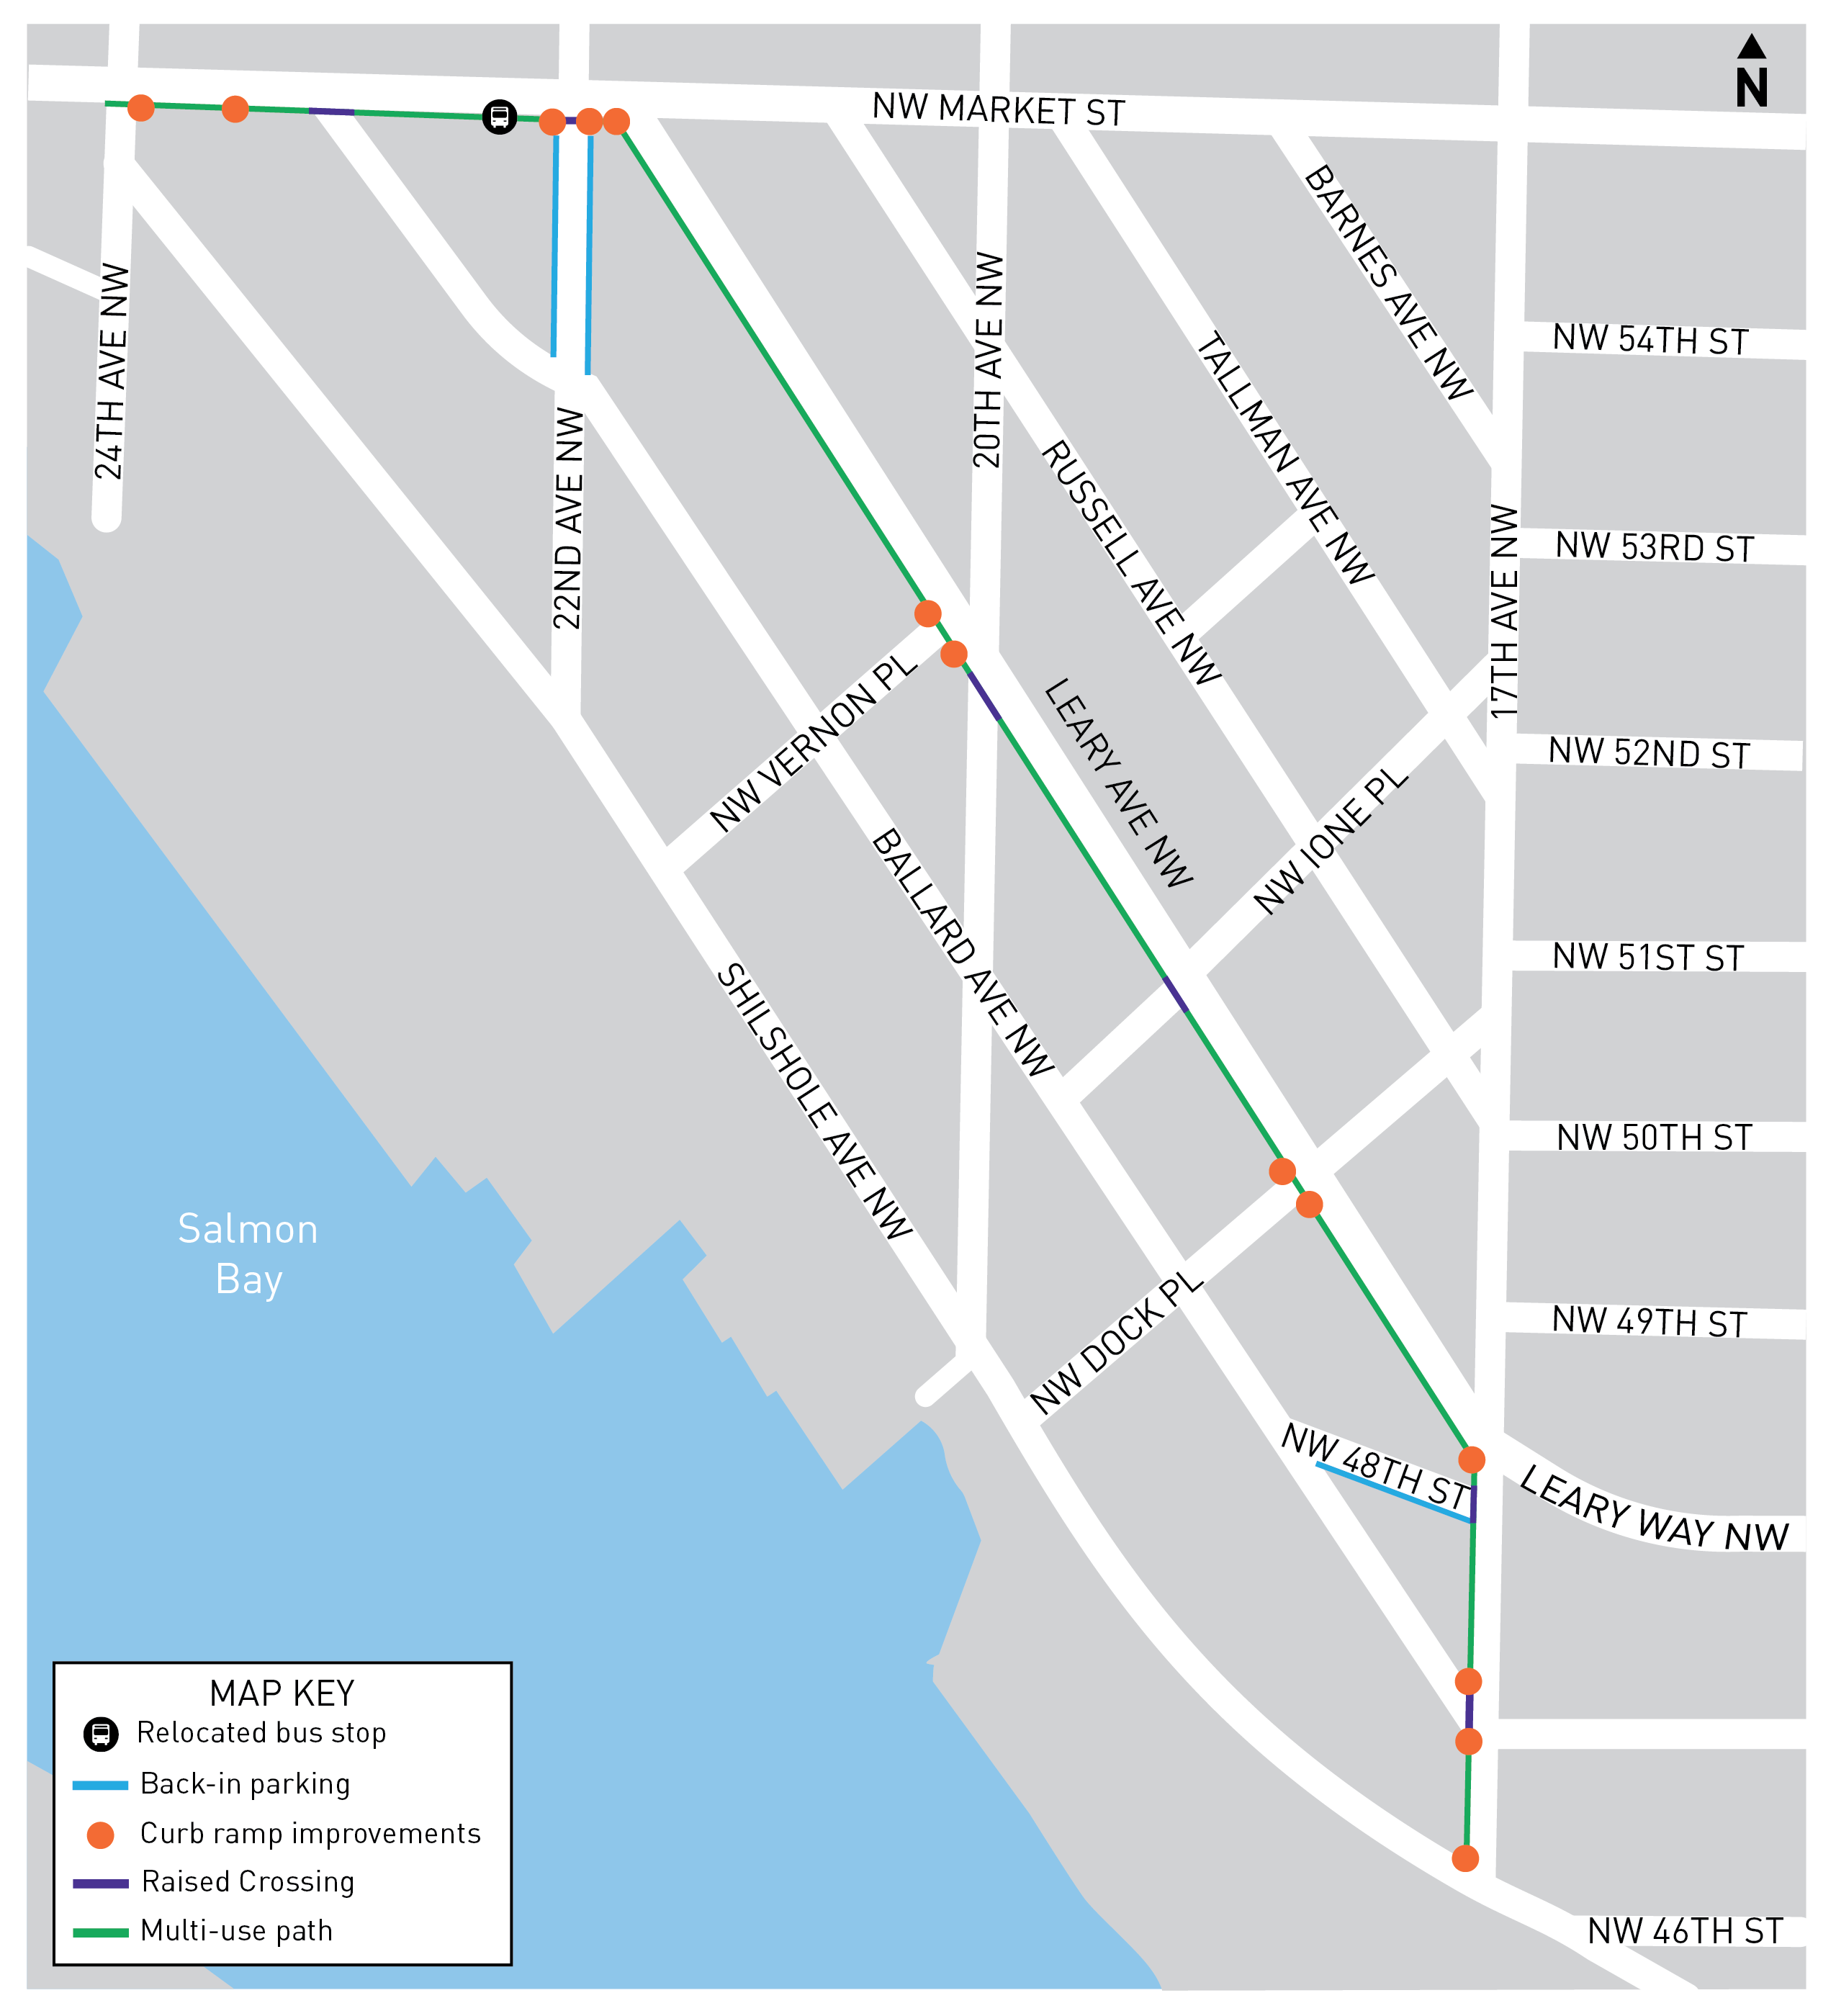 Map of proposed oute would extend along NW Market Street two blocks east from 24th Ave NW and then run along Leary Ave NW to 17th Ave NW where it re-joins the Shilshole Route